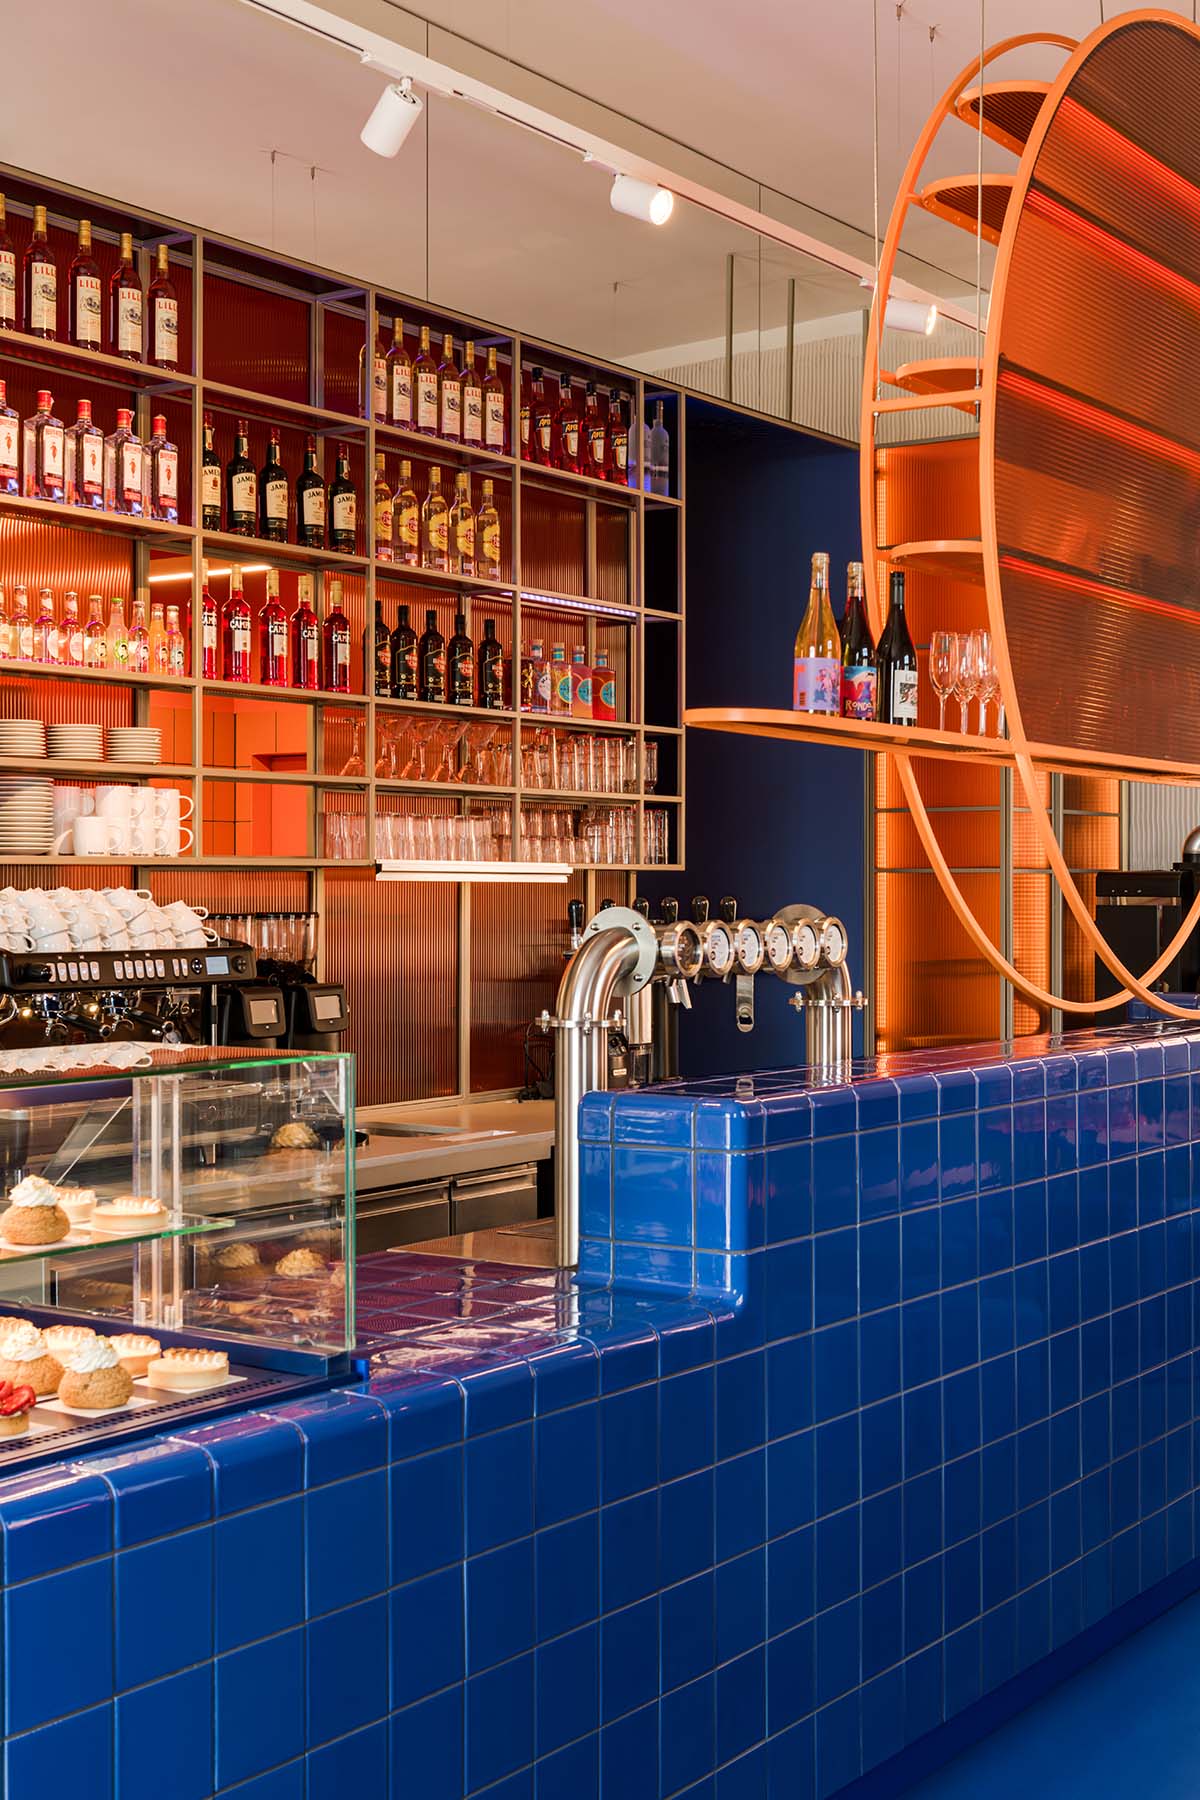 Znamy się creates club-like atmosphere in pastry shop featuring orange-tinted circular element 